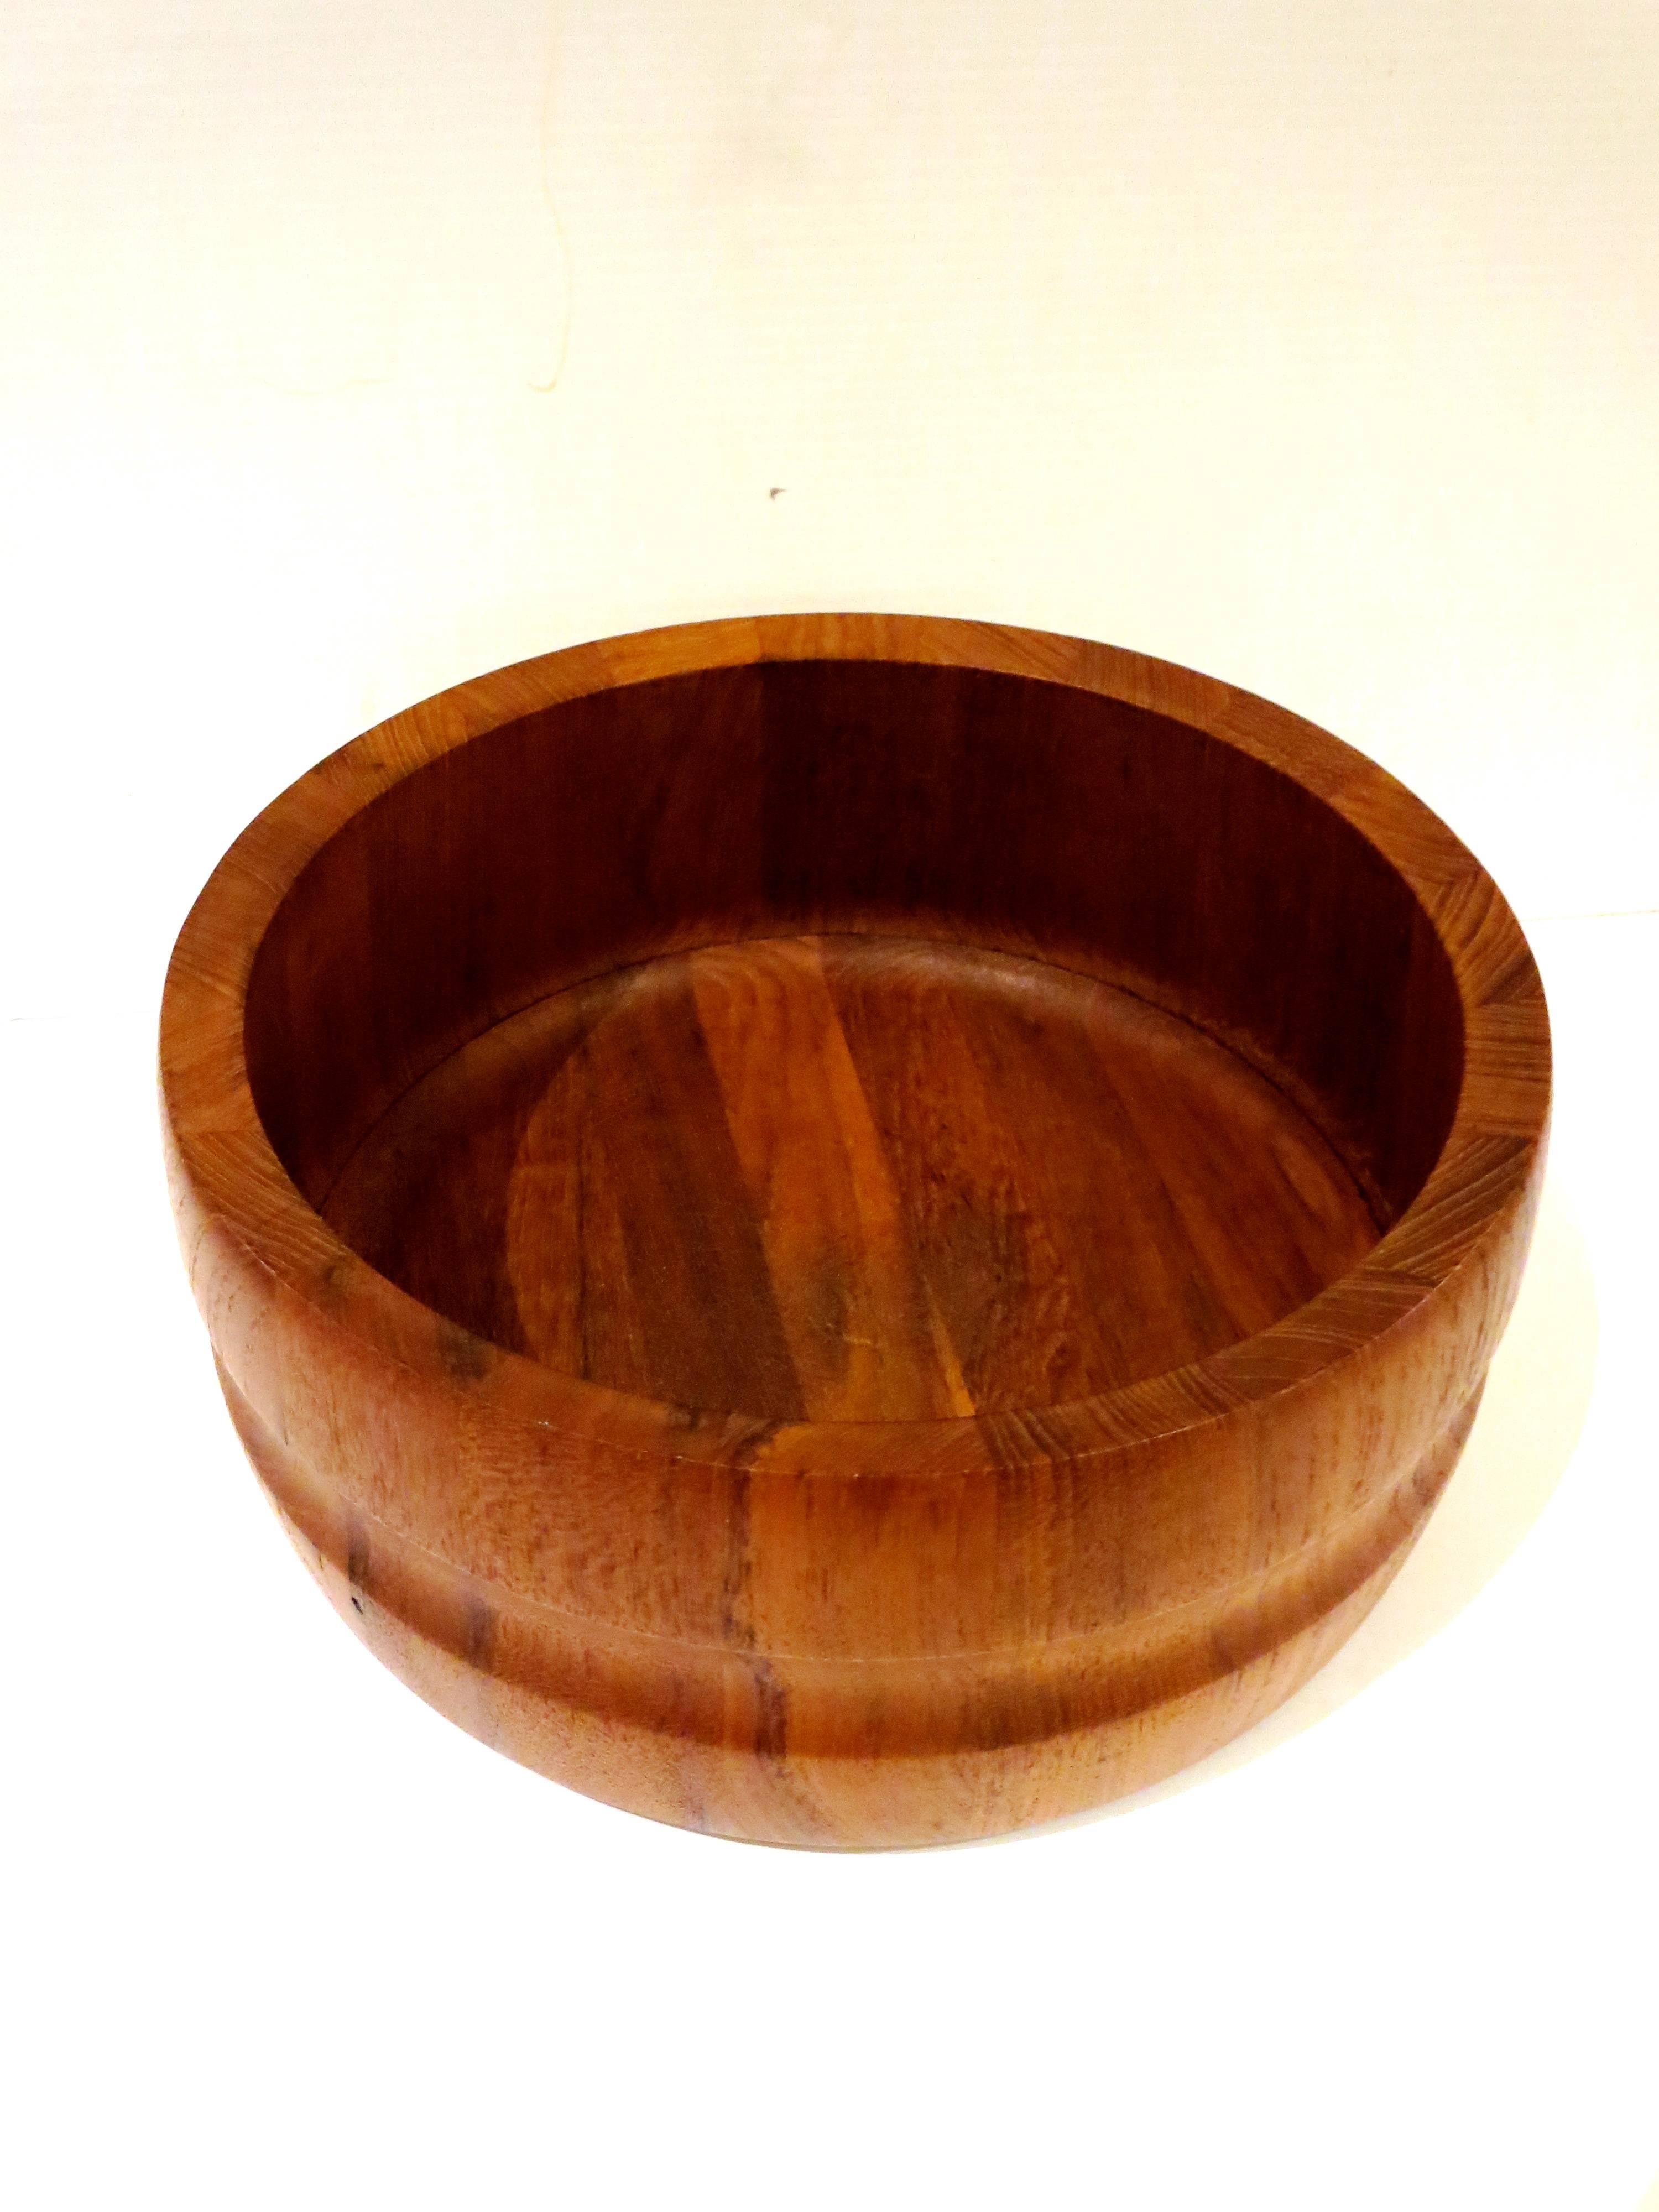 Rare shape on this solid teak, salad bowl designed by Quistgaard for Dansk, circa 1950s great condition early production.